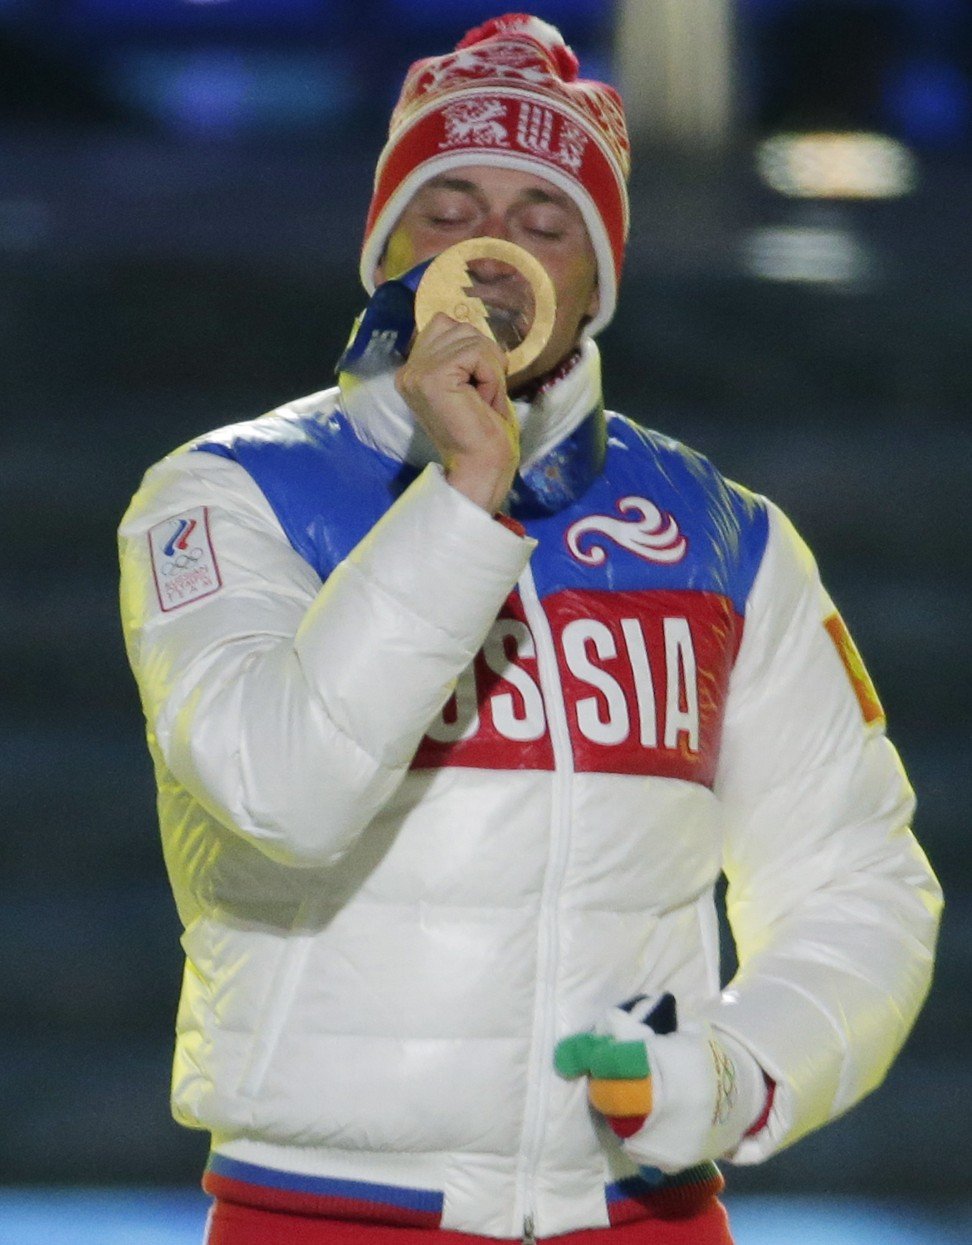 Russia's gold medal winner Alexander Legkov kisses his medal during the medals ceremony for the men's 50km cross-country race at the 2014 Winter Olympics in Sochi. Photo: AP